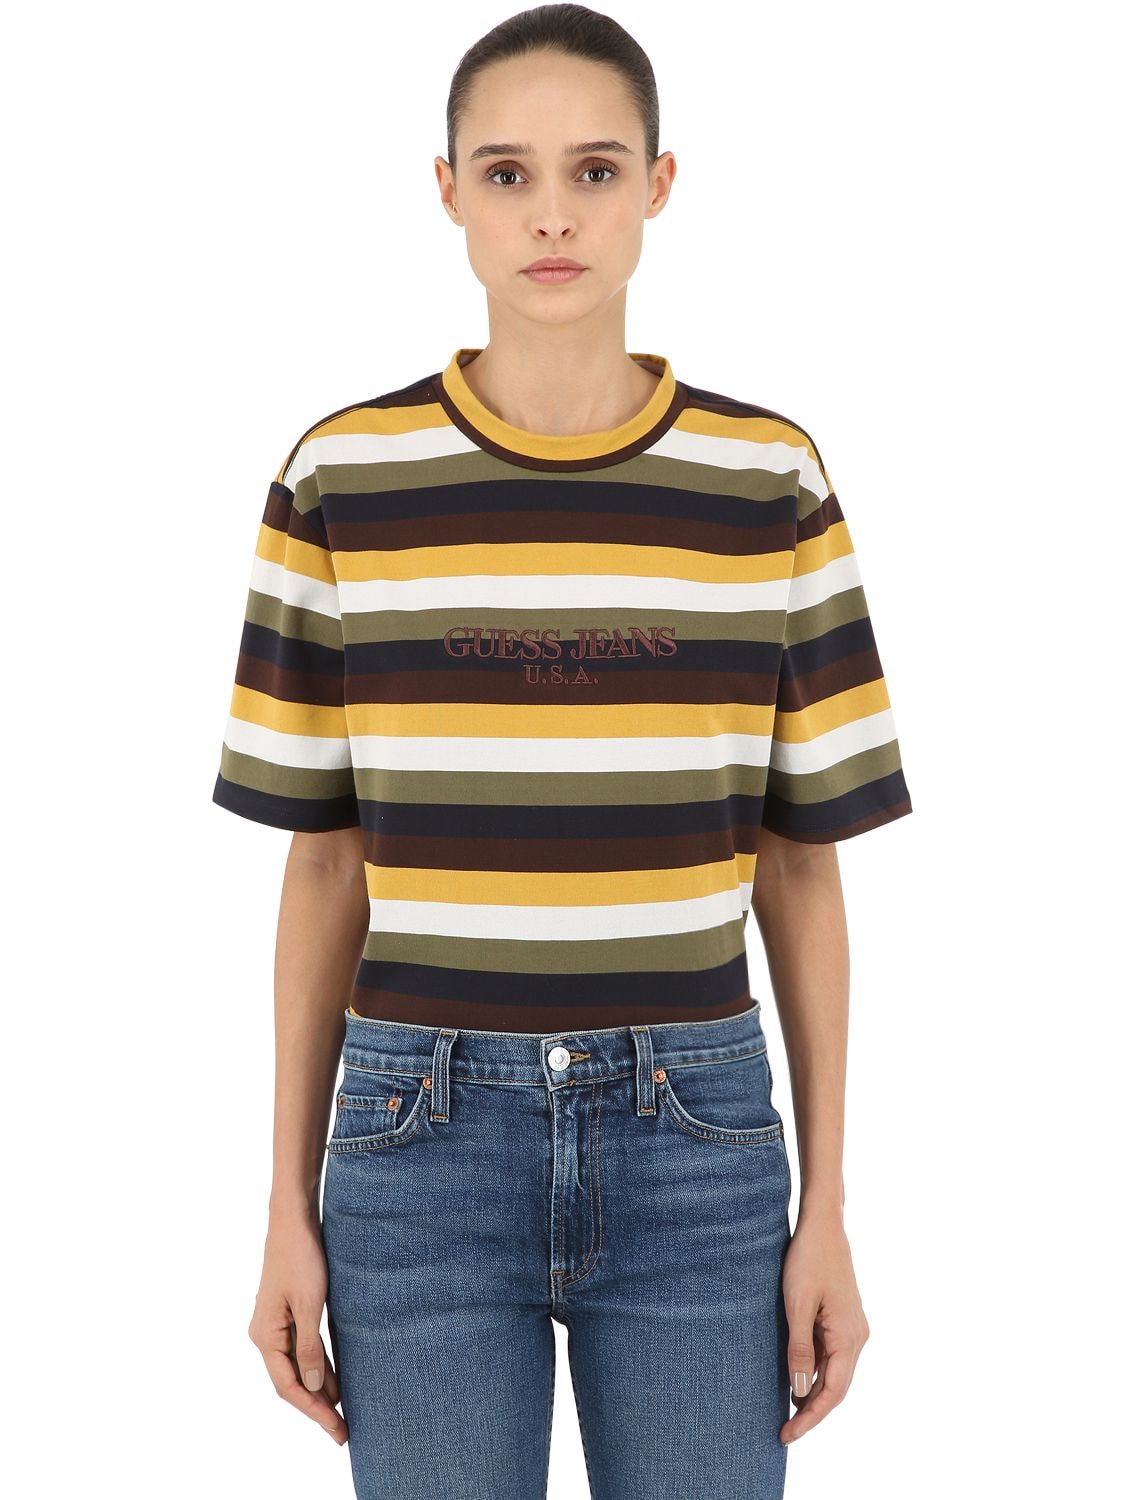 Guess Jeans U.s.a. Striped Cotton Jersey T-shirt In Multicolor